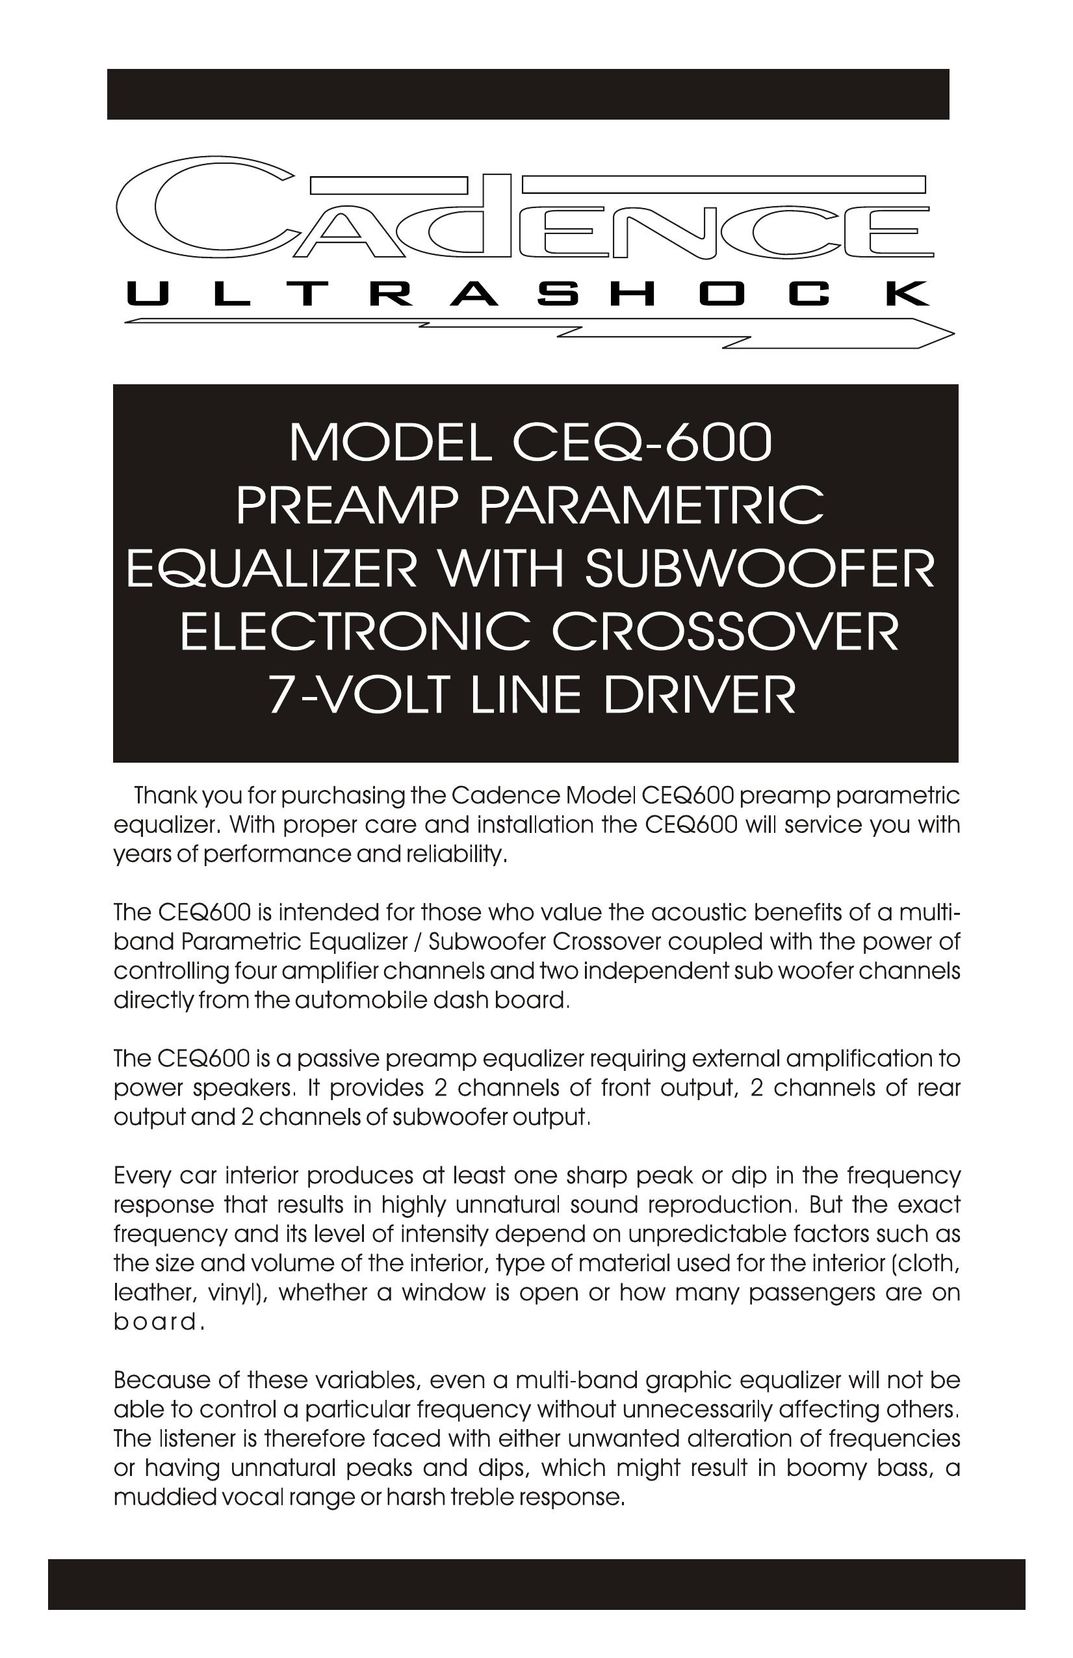 Cadence CEQ-600 Stereo Equalizer User Manual (Page 1)